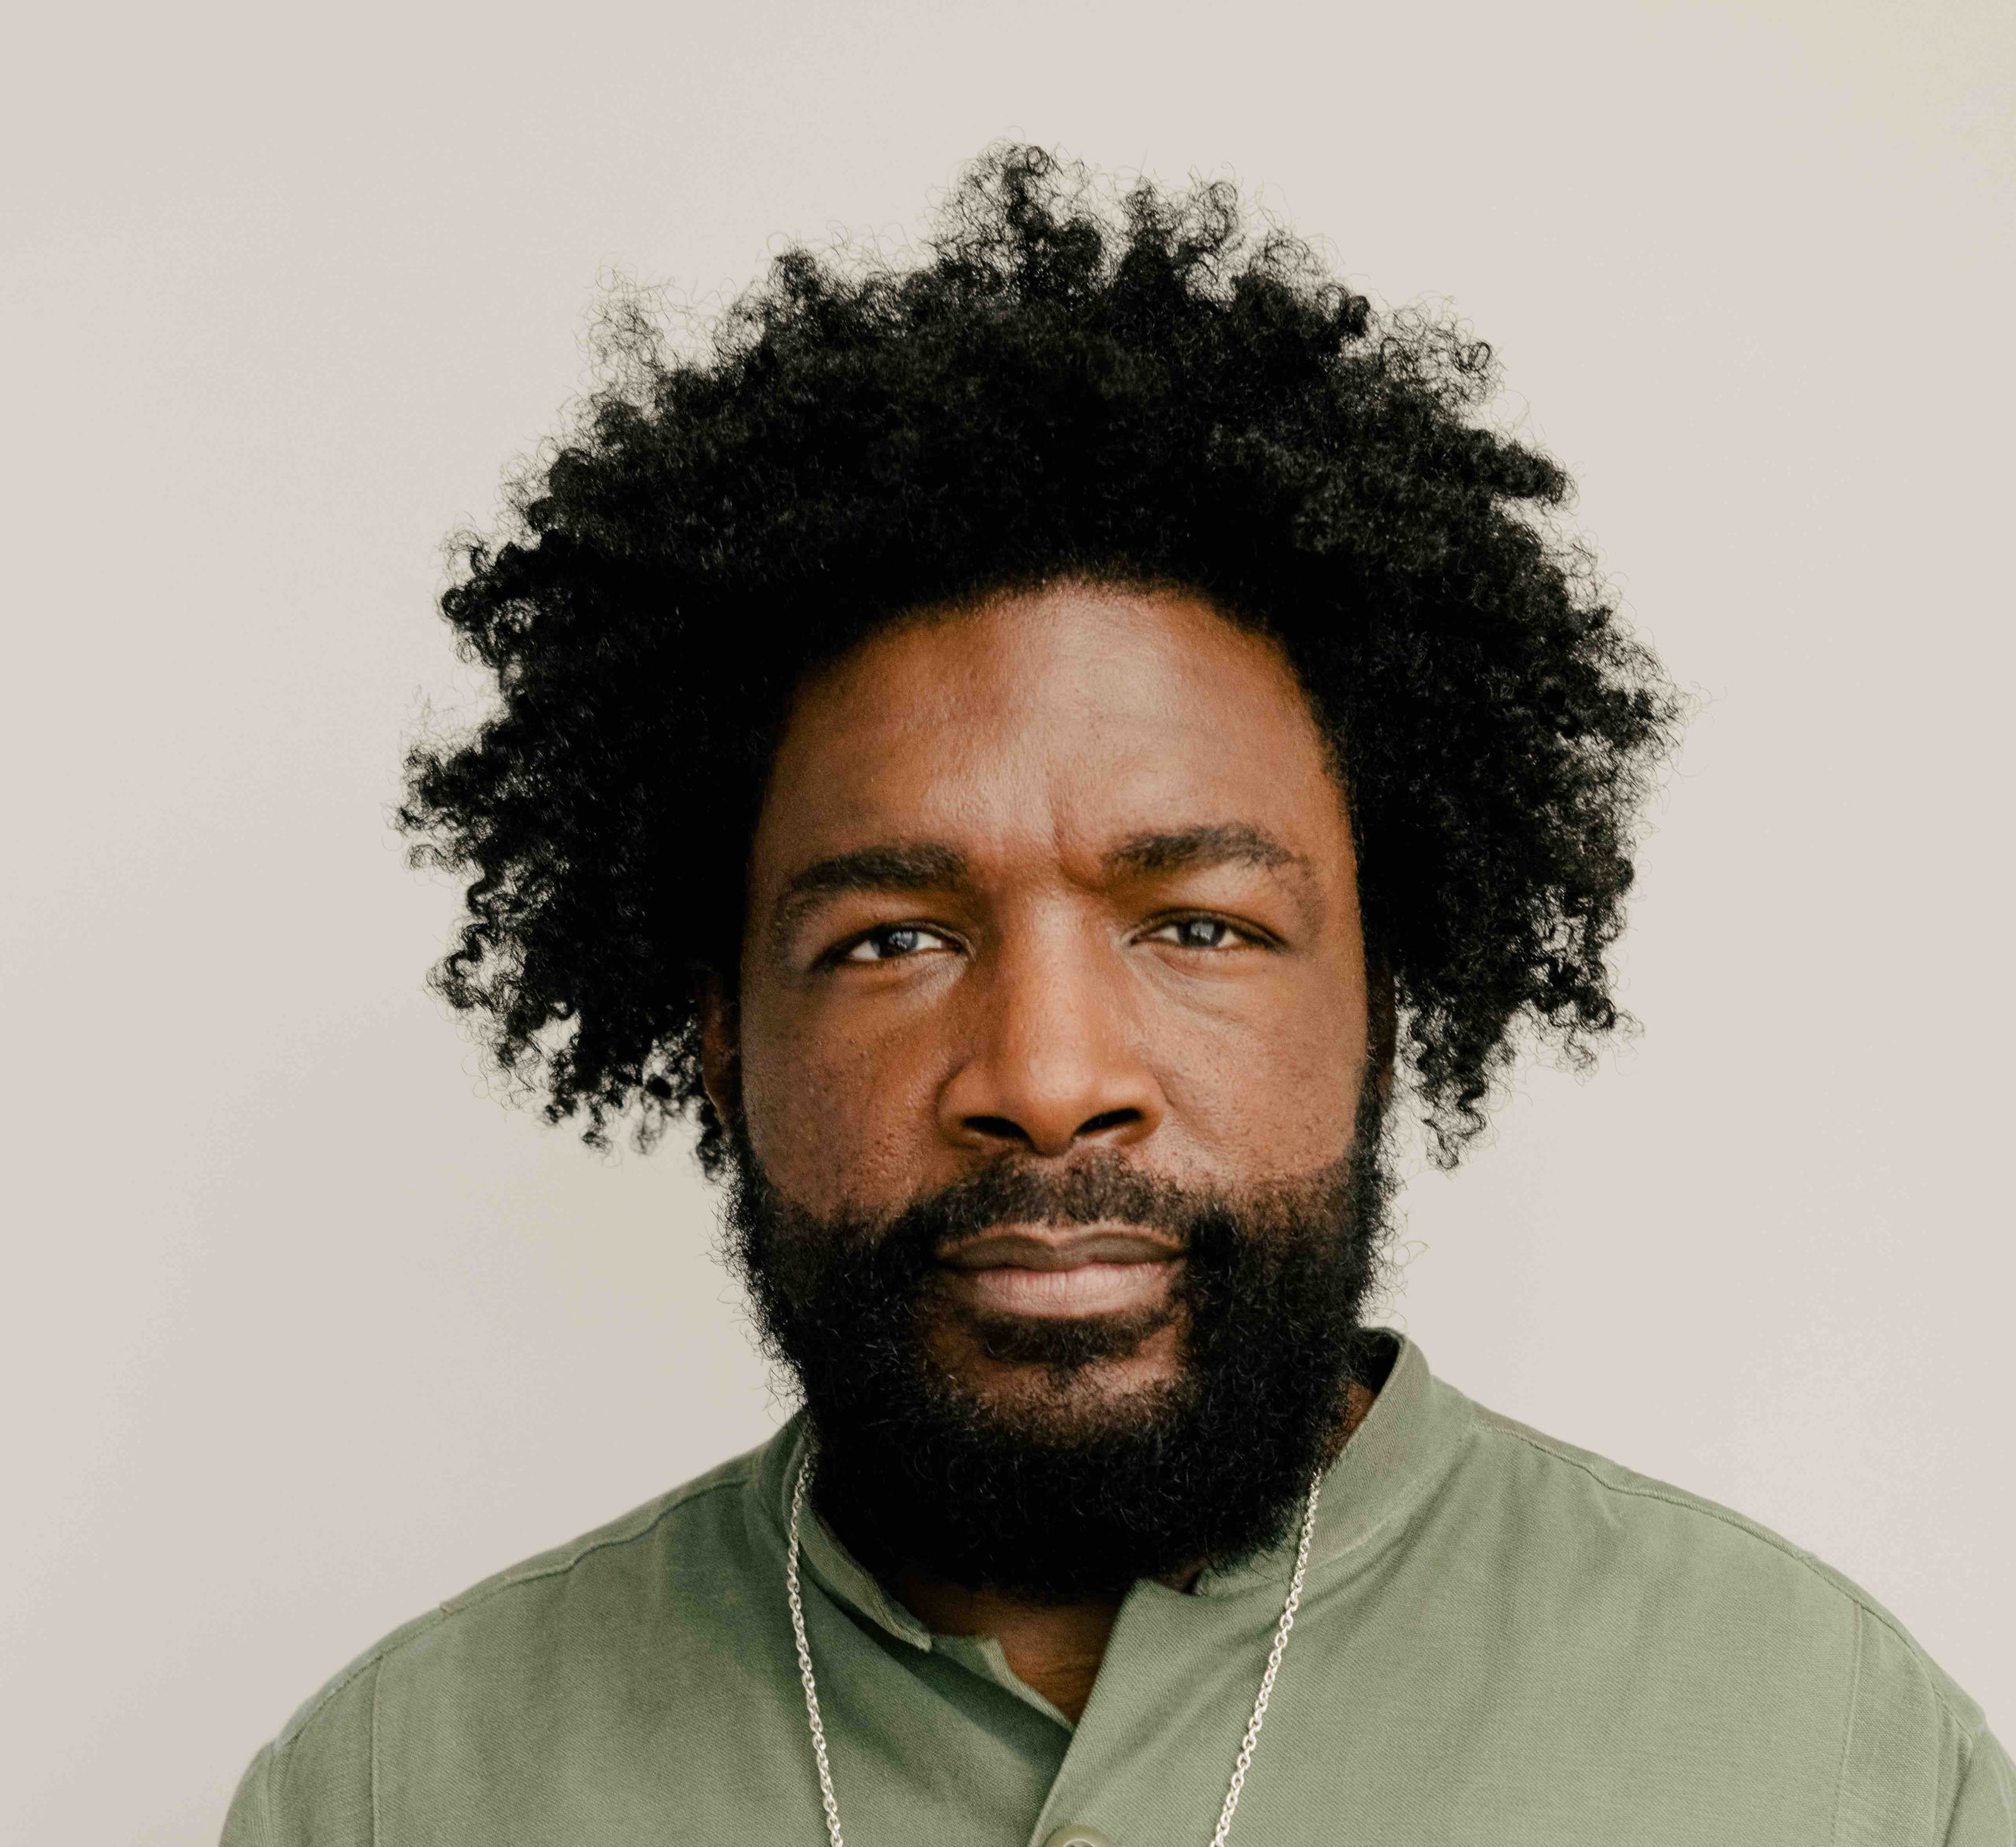 Questlove: The Soul of Summer